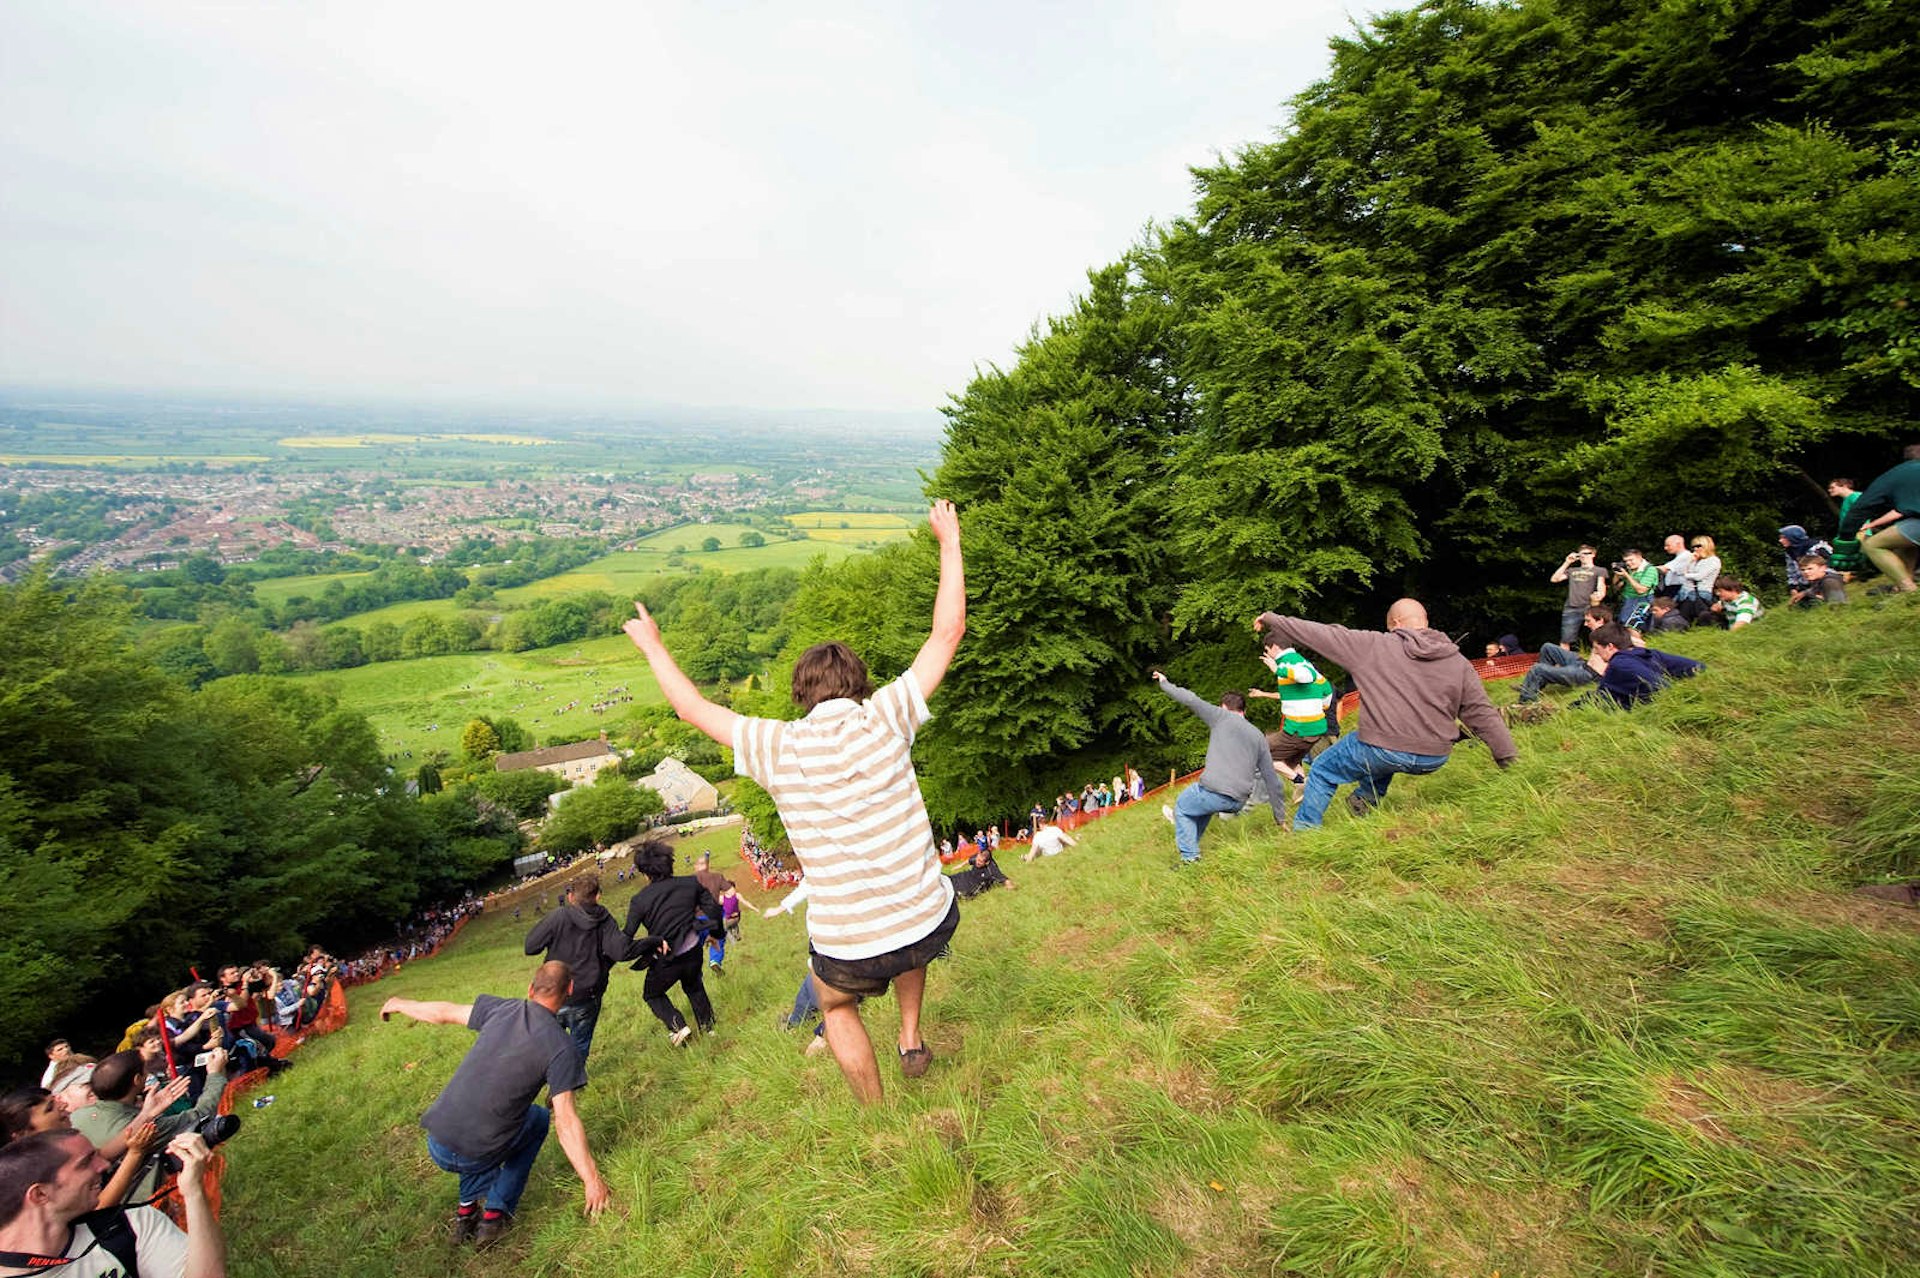 Chasing a cheese down a hill is taking very seriously in © Christian Kober / Getty Images